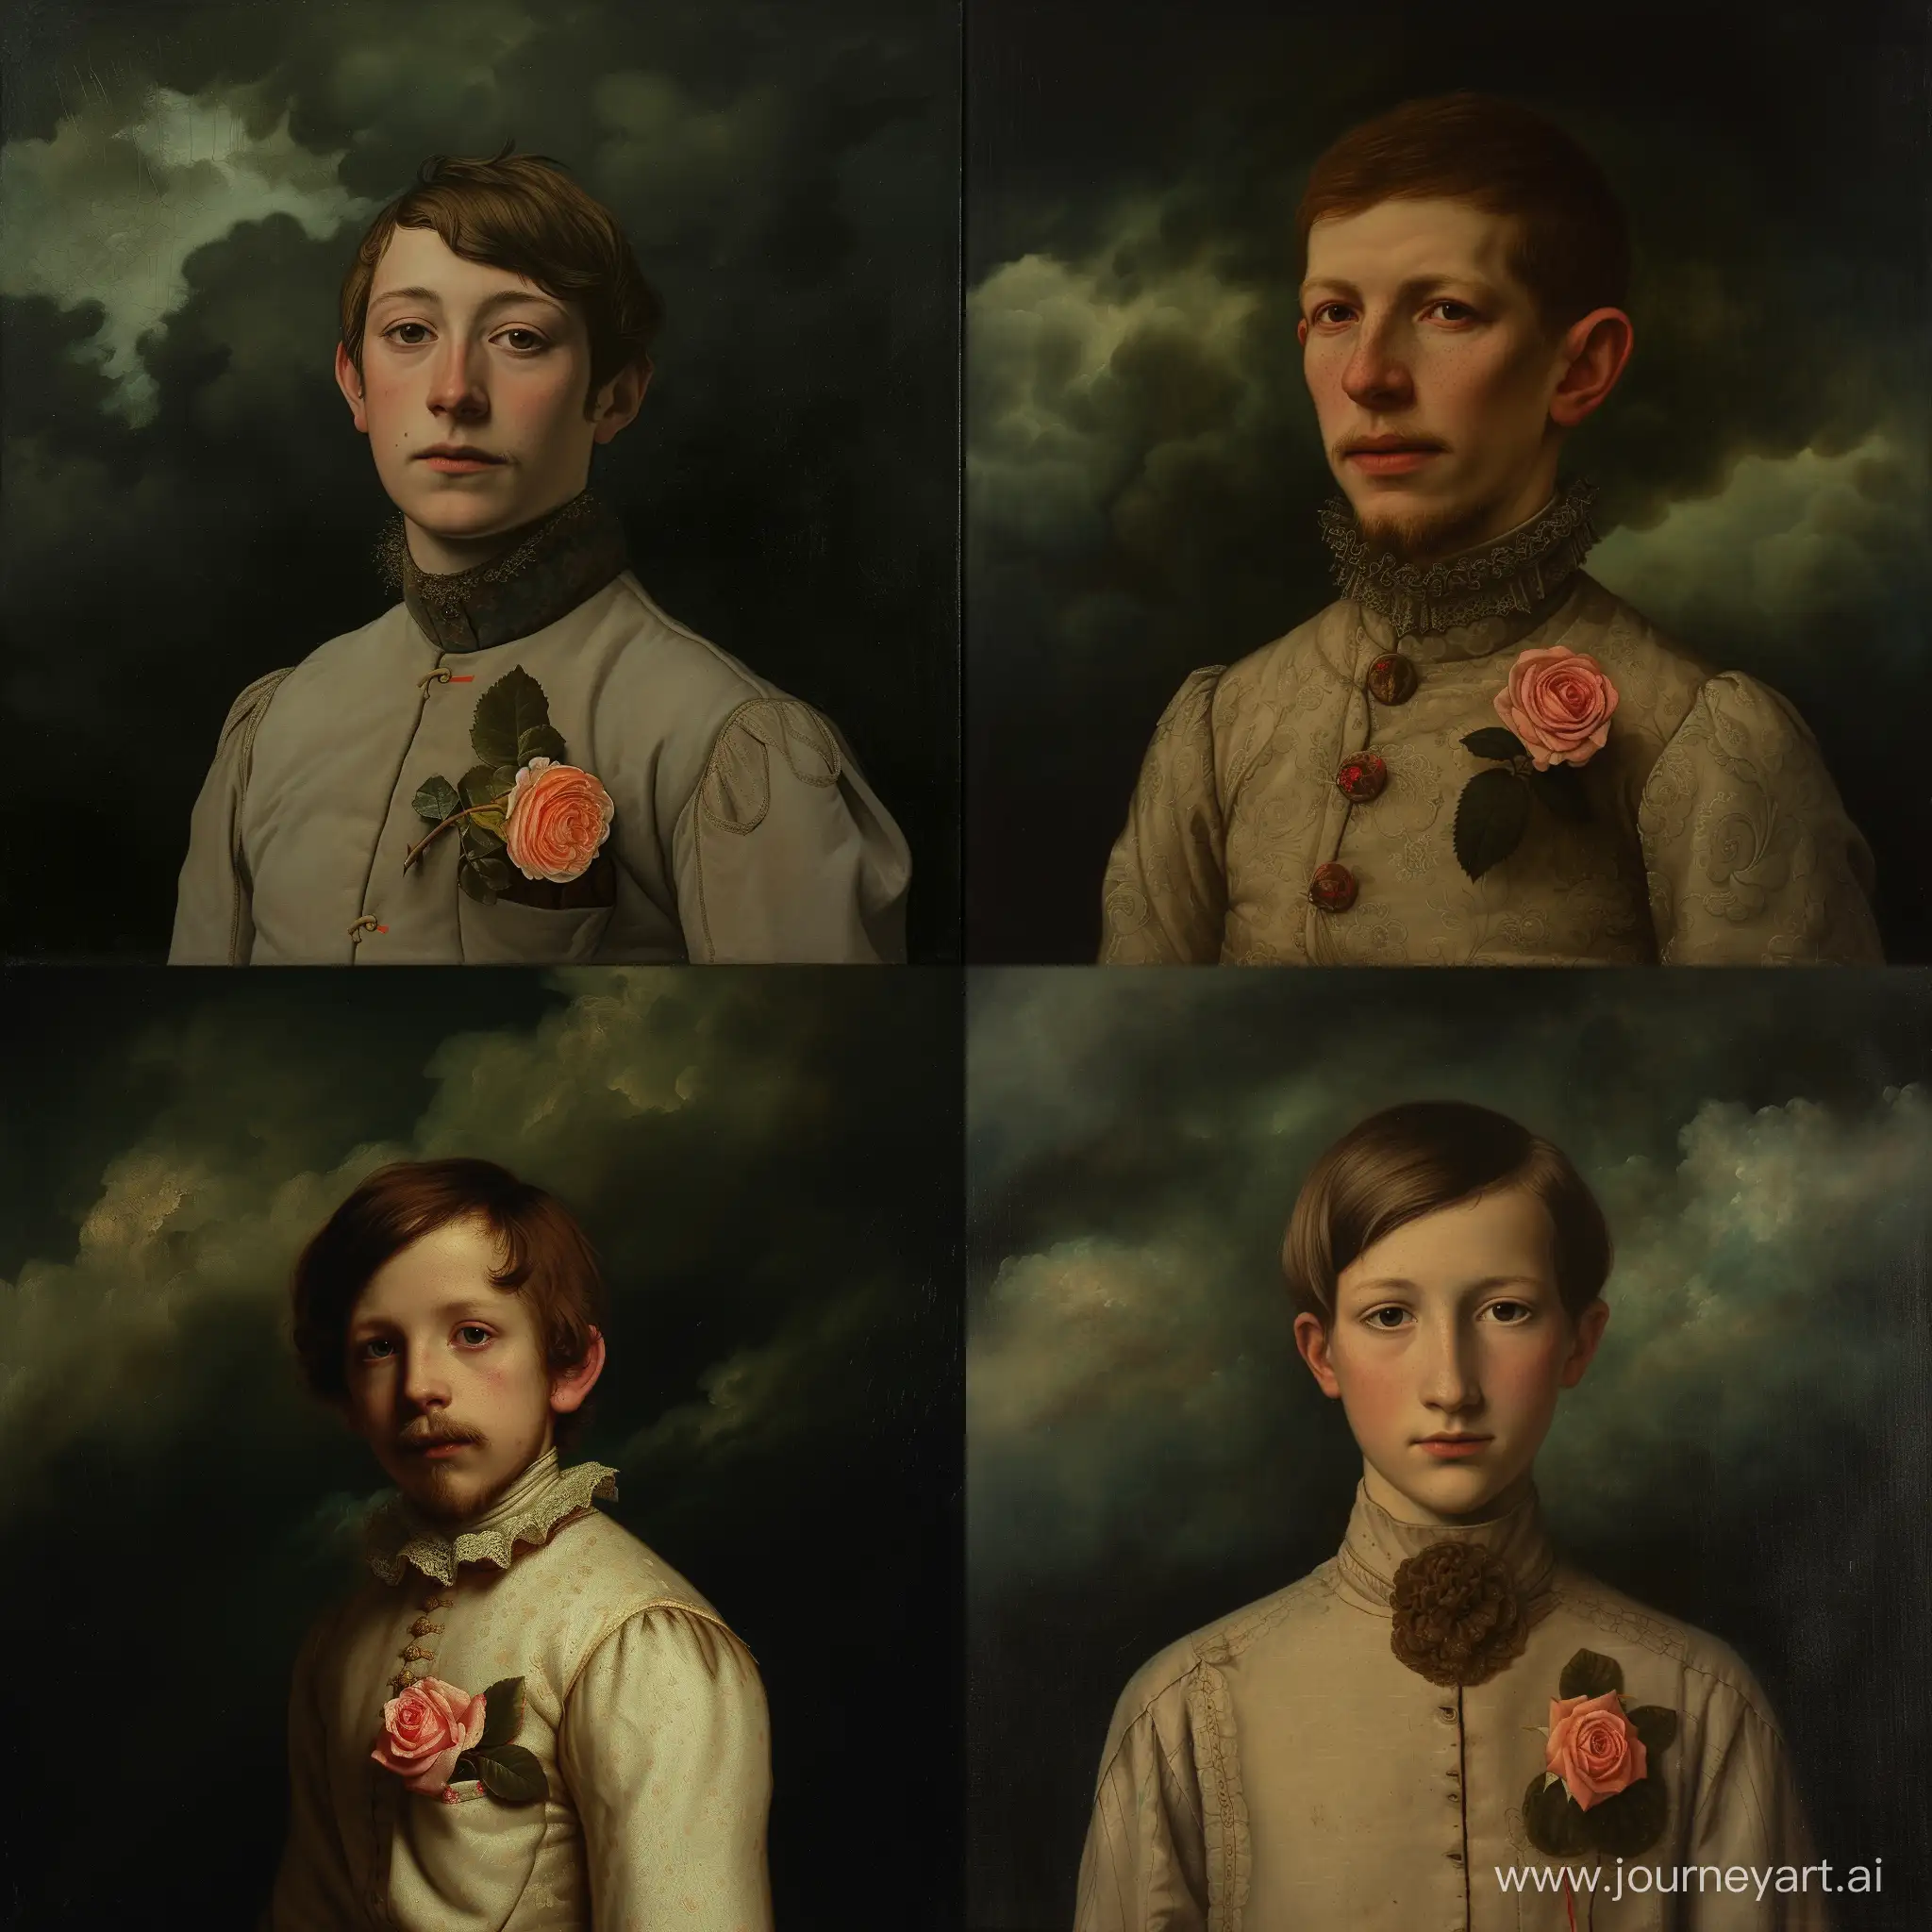 Victorian-Style-Portrait-MiddleAged-Man-with-Rose-Flower-in-Collar